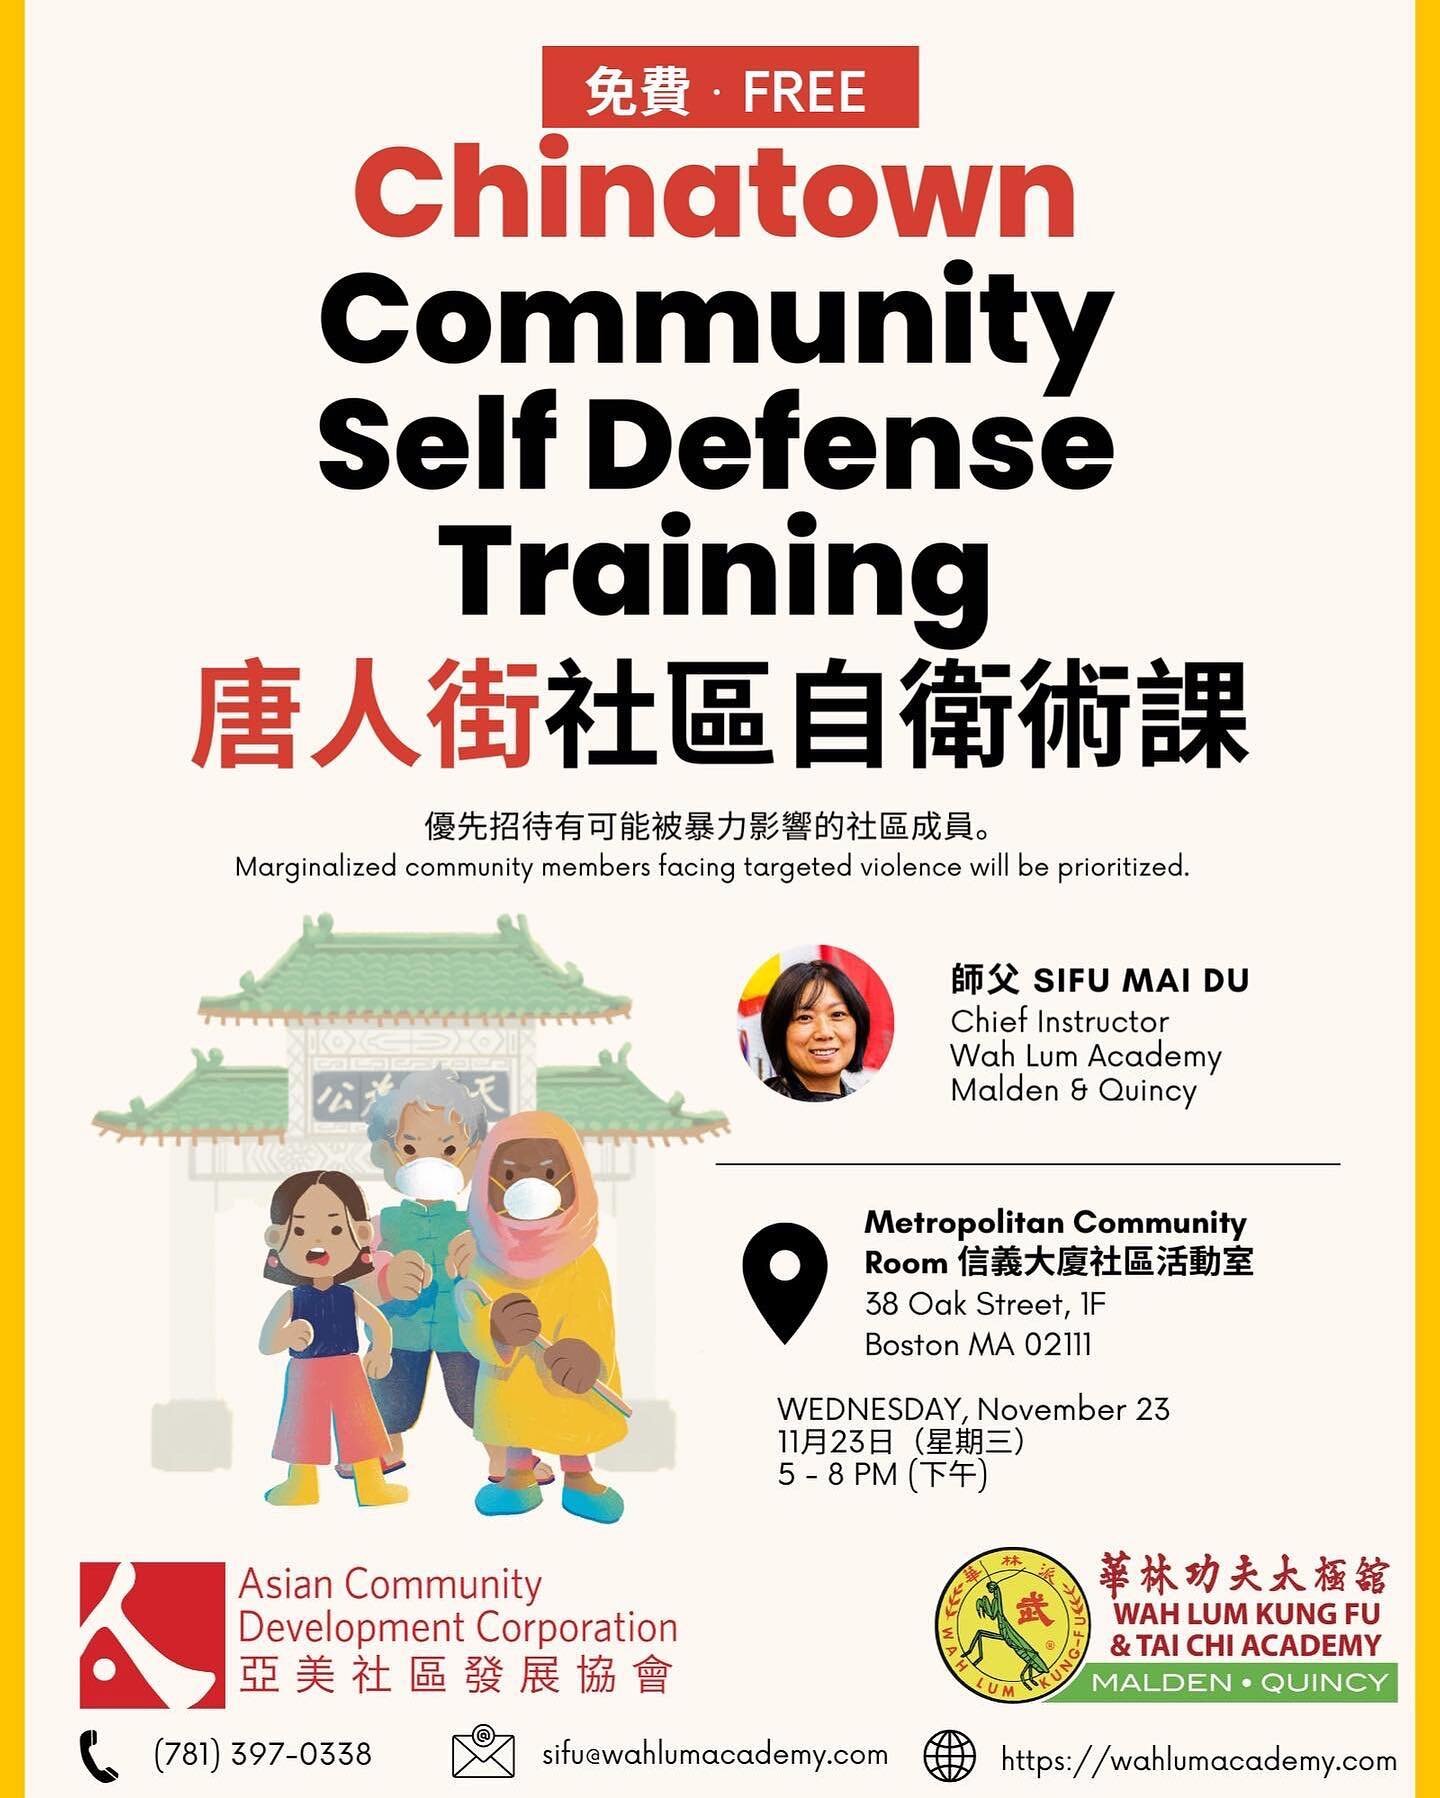 @wahlummaldenquincy is holding yet another *free* self defense training in Chinatown at the Metropolitan Community Room with @asiancdc next Wednesday, from 5-8 PM. so much love to our Chinatown community, esp @_jeenachang @helenywong @ashyung for the